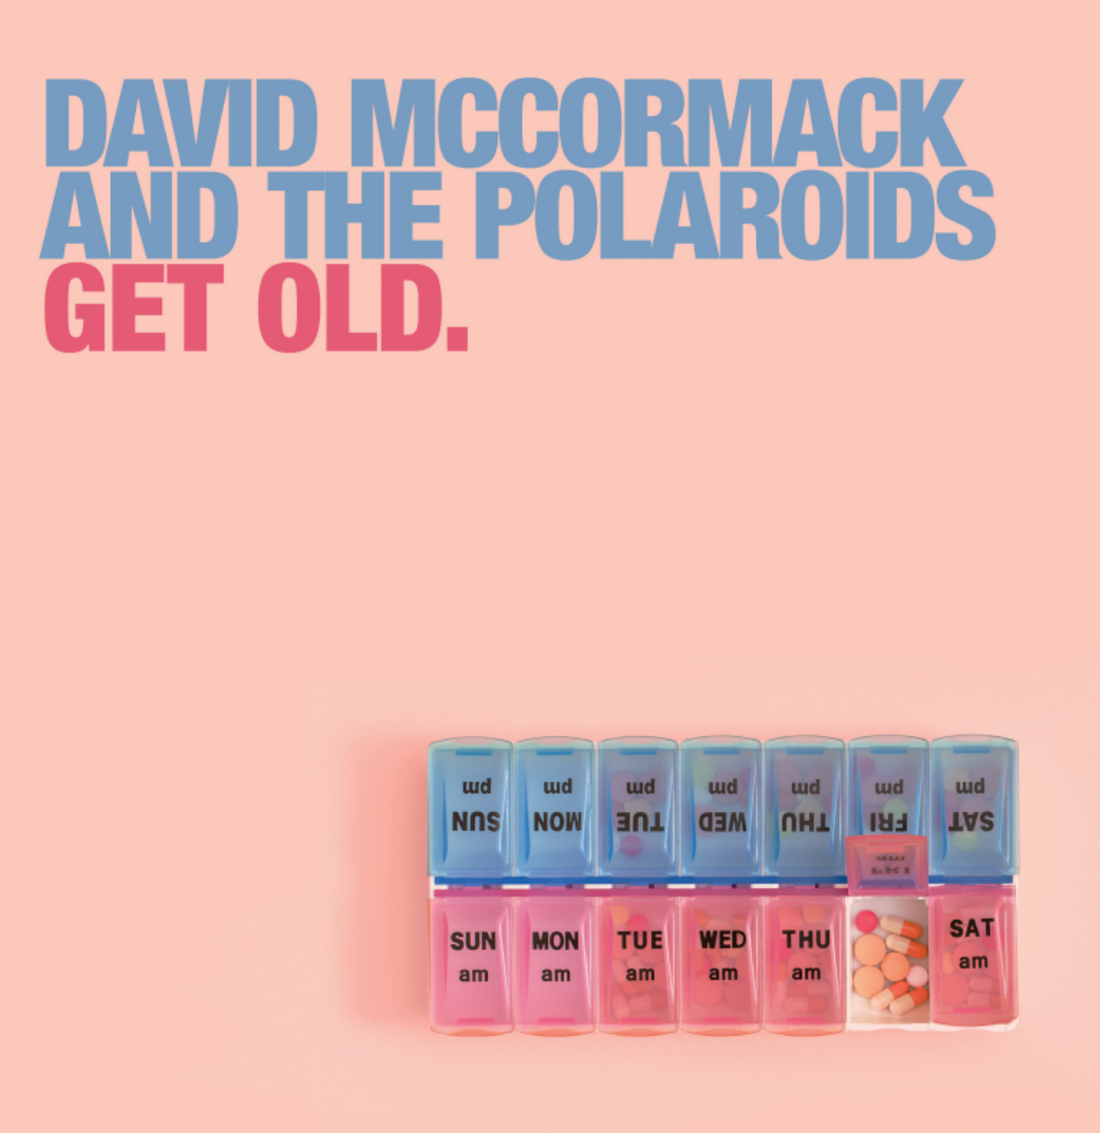 Dave Mccormack and the Polaroids